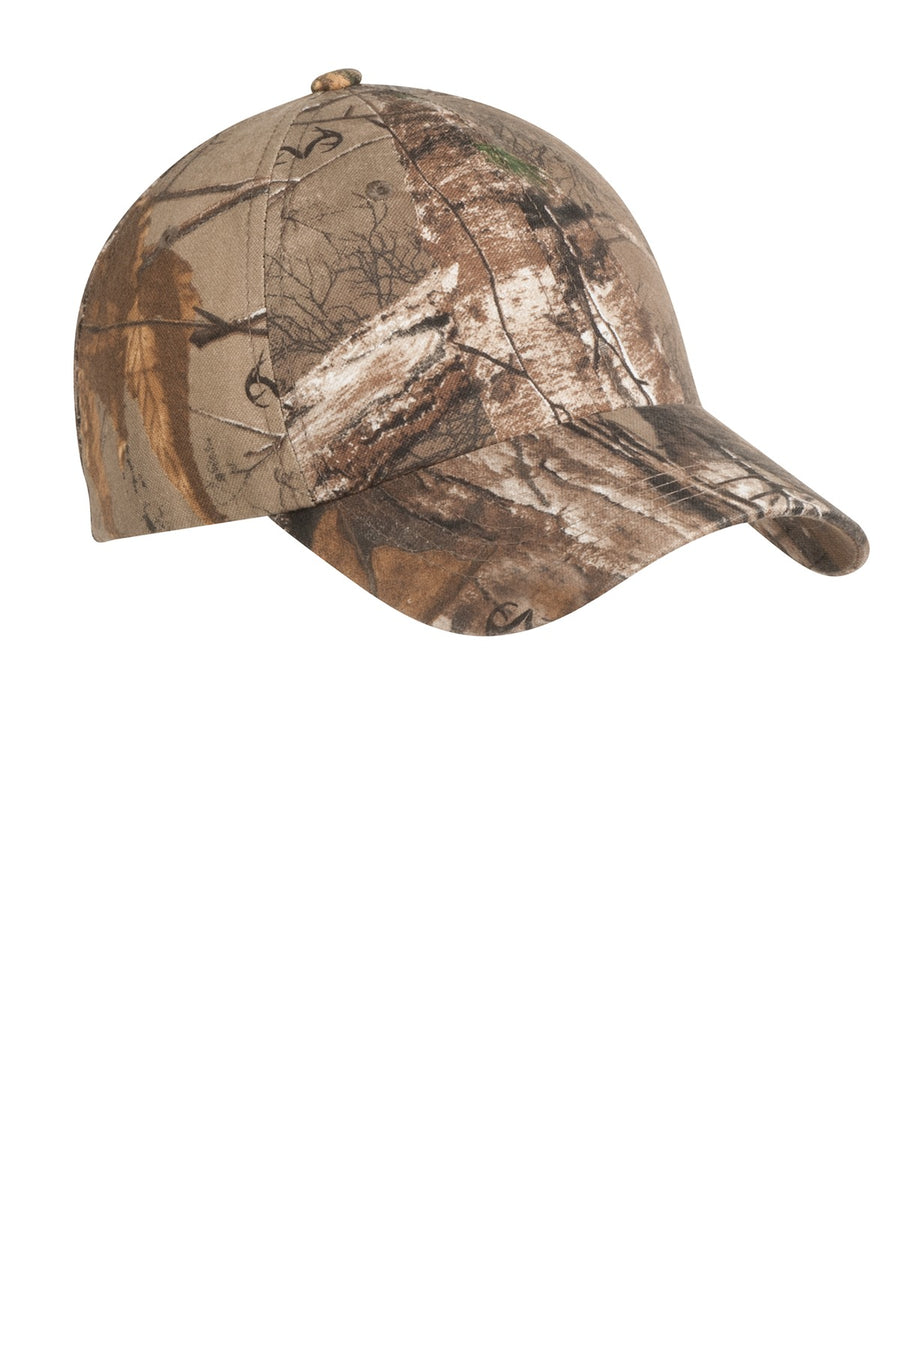 Port Authority Pro Camouflage Series Garment-Washed Cap.